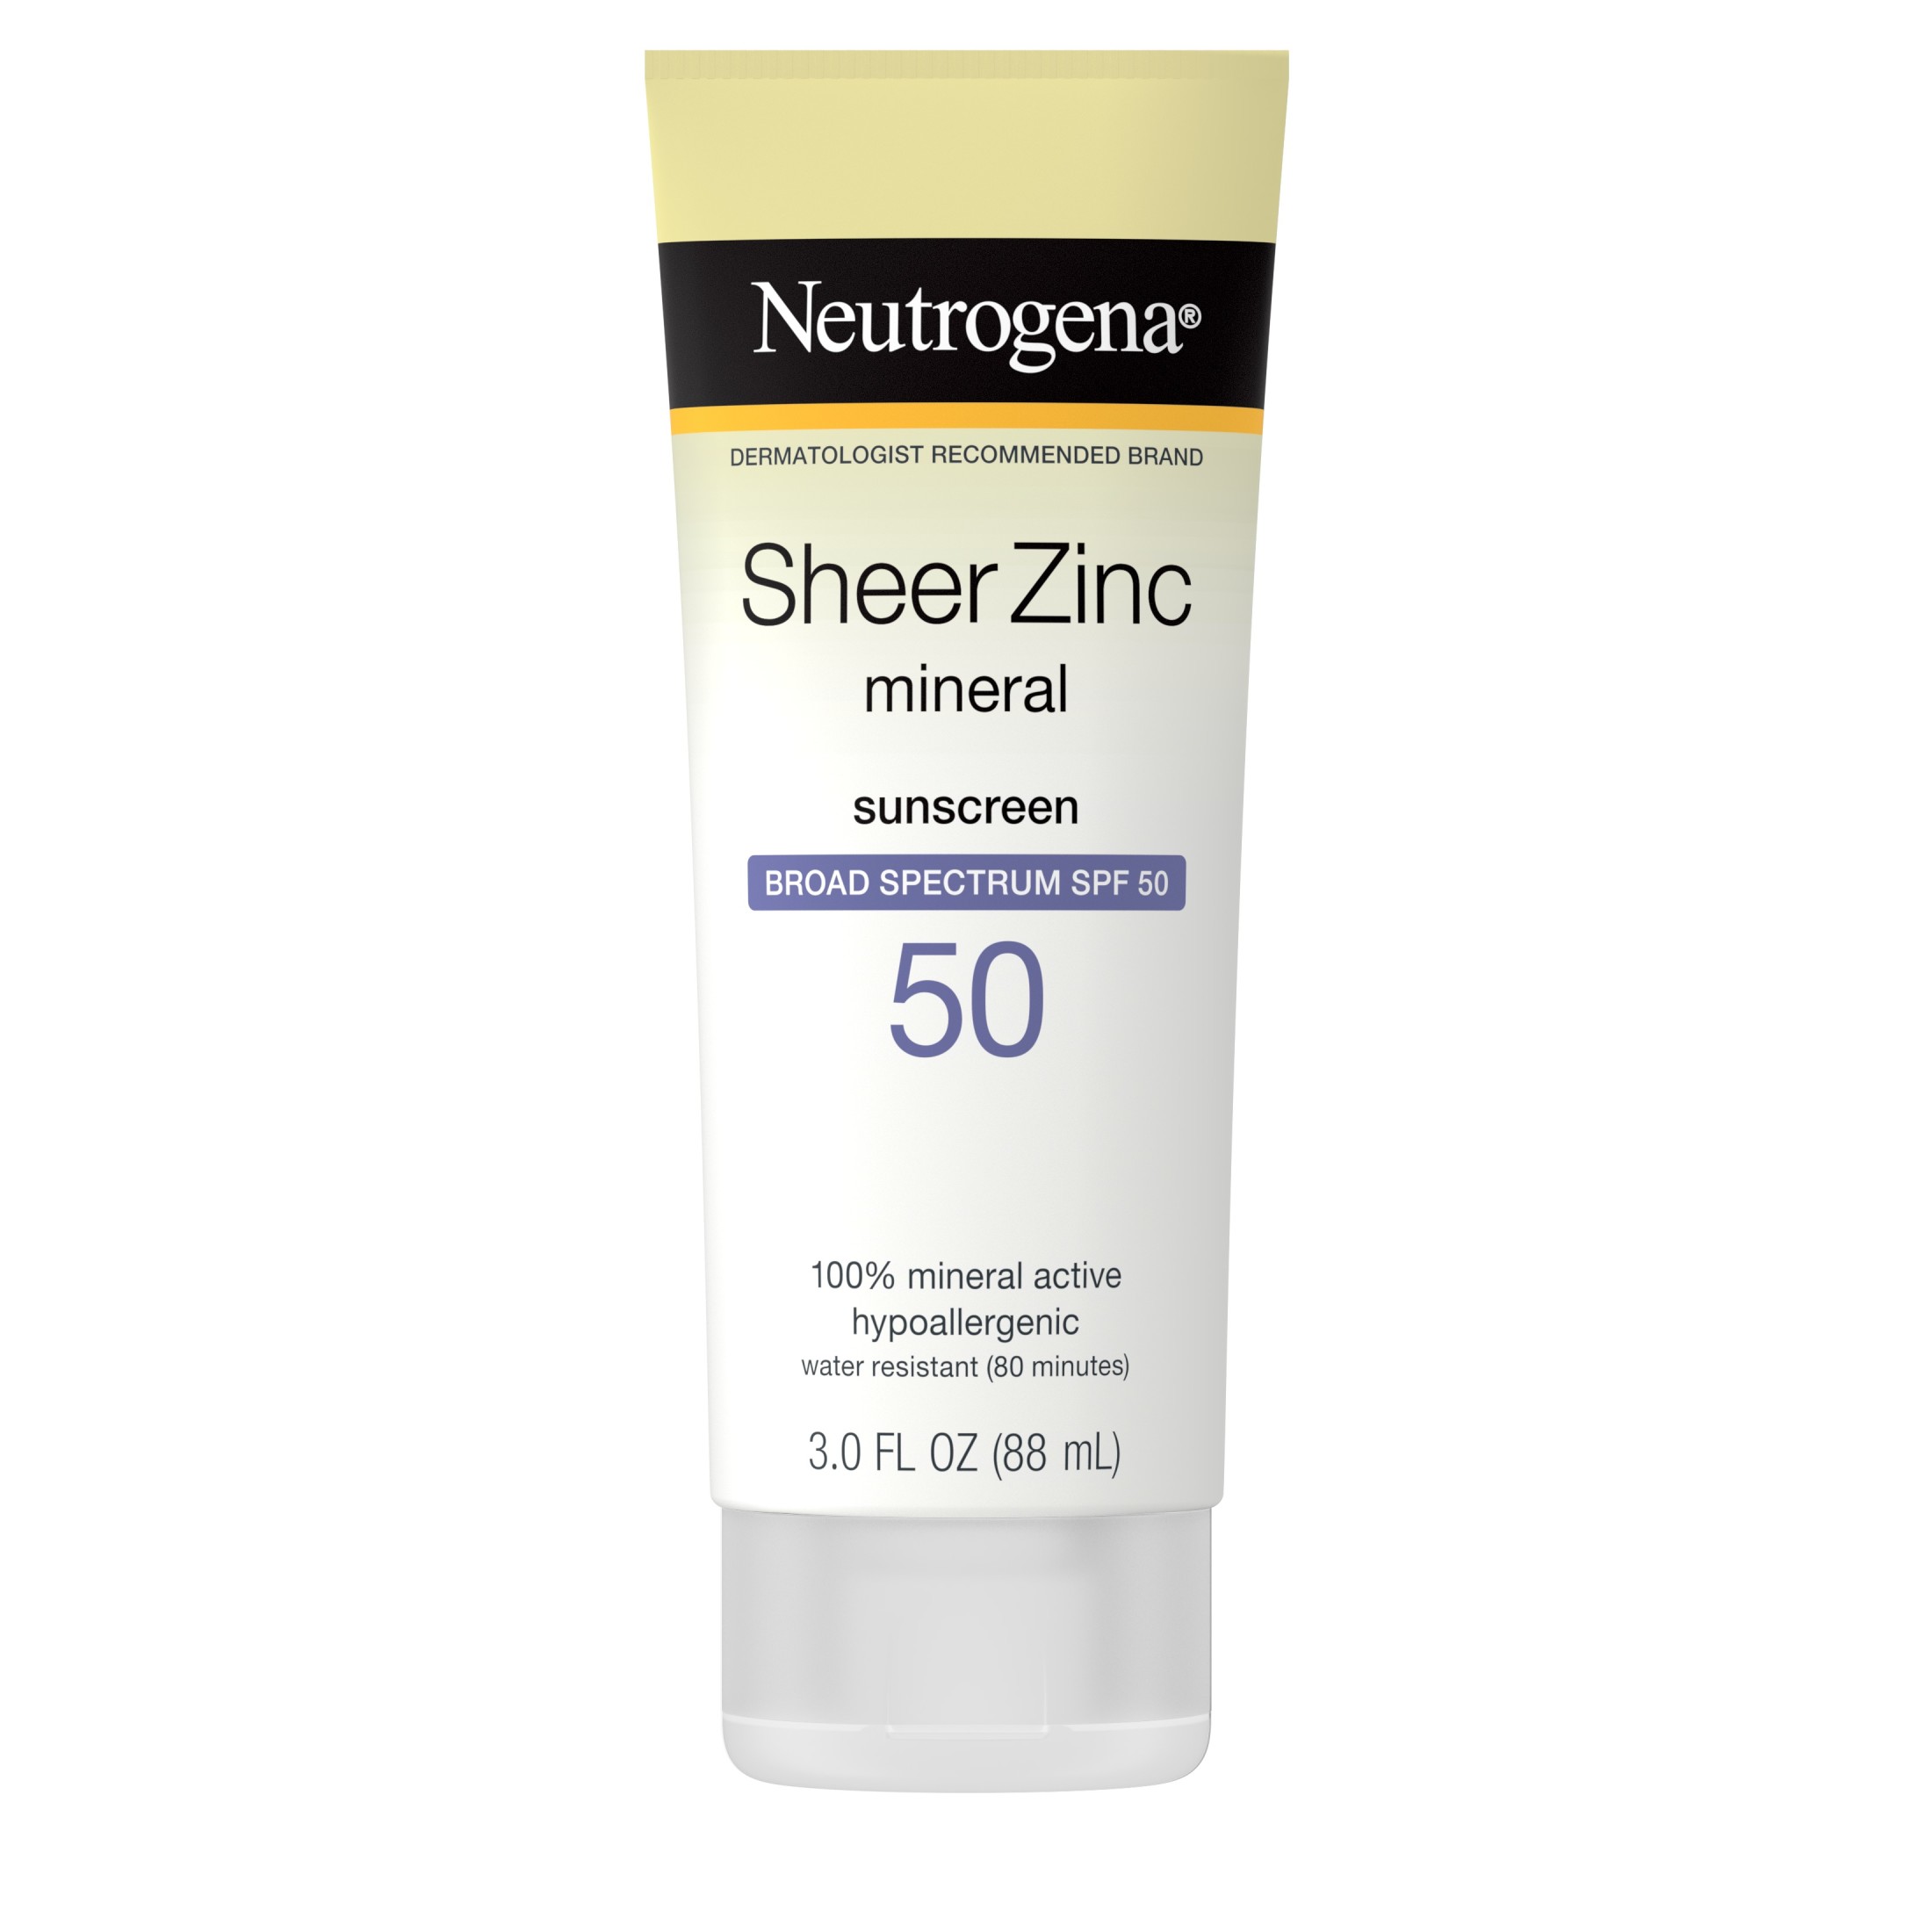 Neutrogena Sheer Zinc Dry-Touch Sunscreen Lotion with SPF 50, 3 fl. oz - image 1 of 15